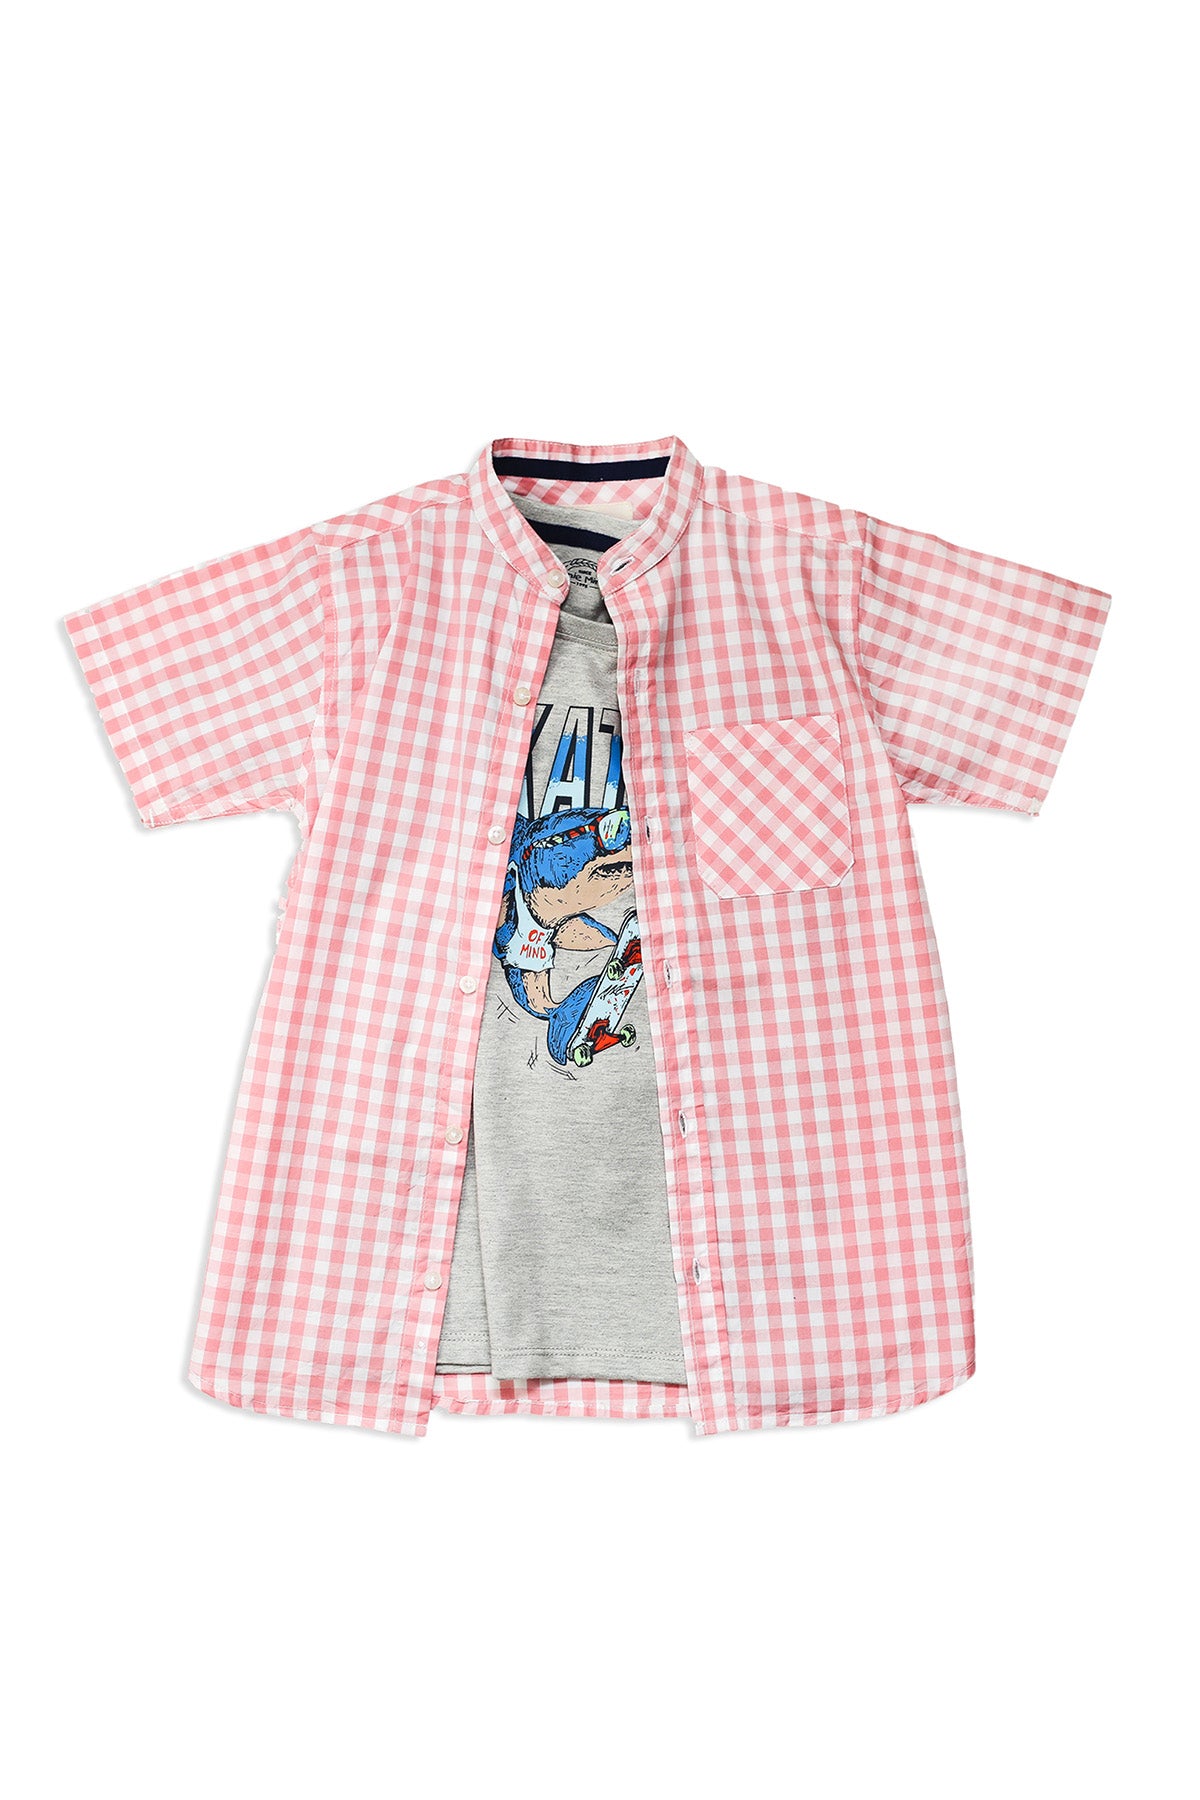 Short Sleeve Checkered Shirt With Graphic T-Shirt And Shorts (SST-137)